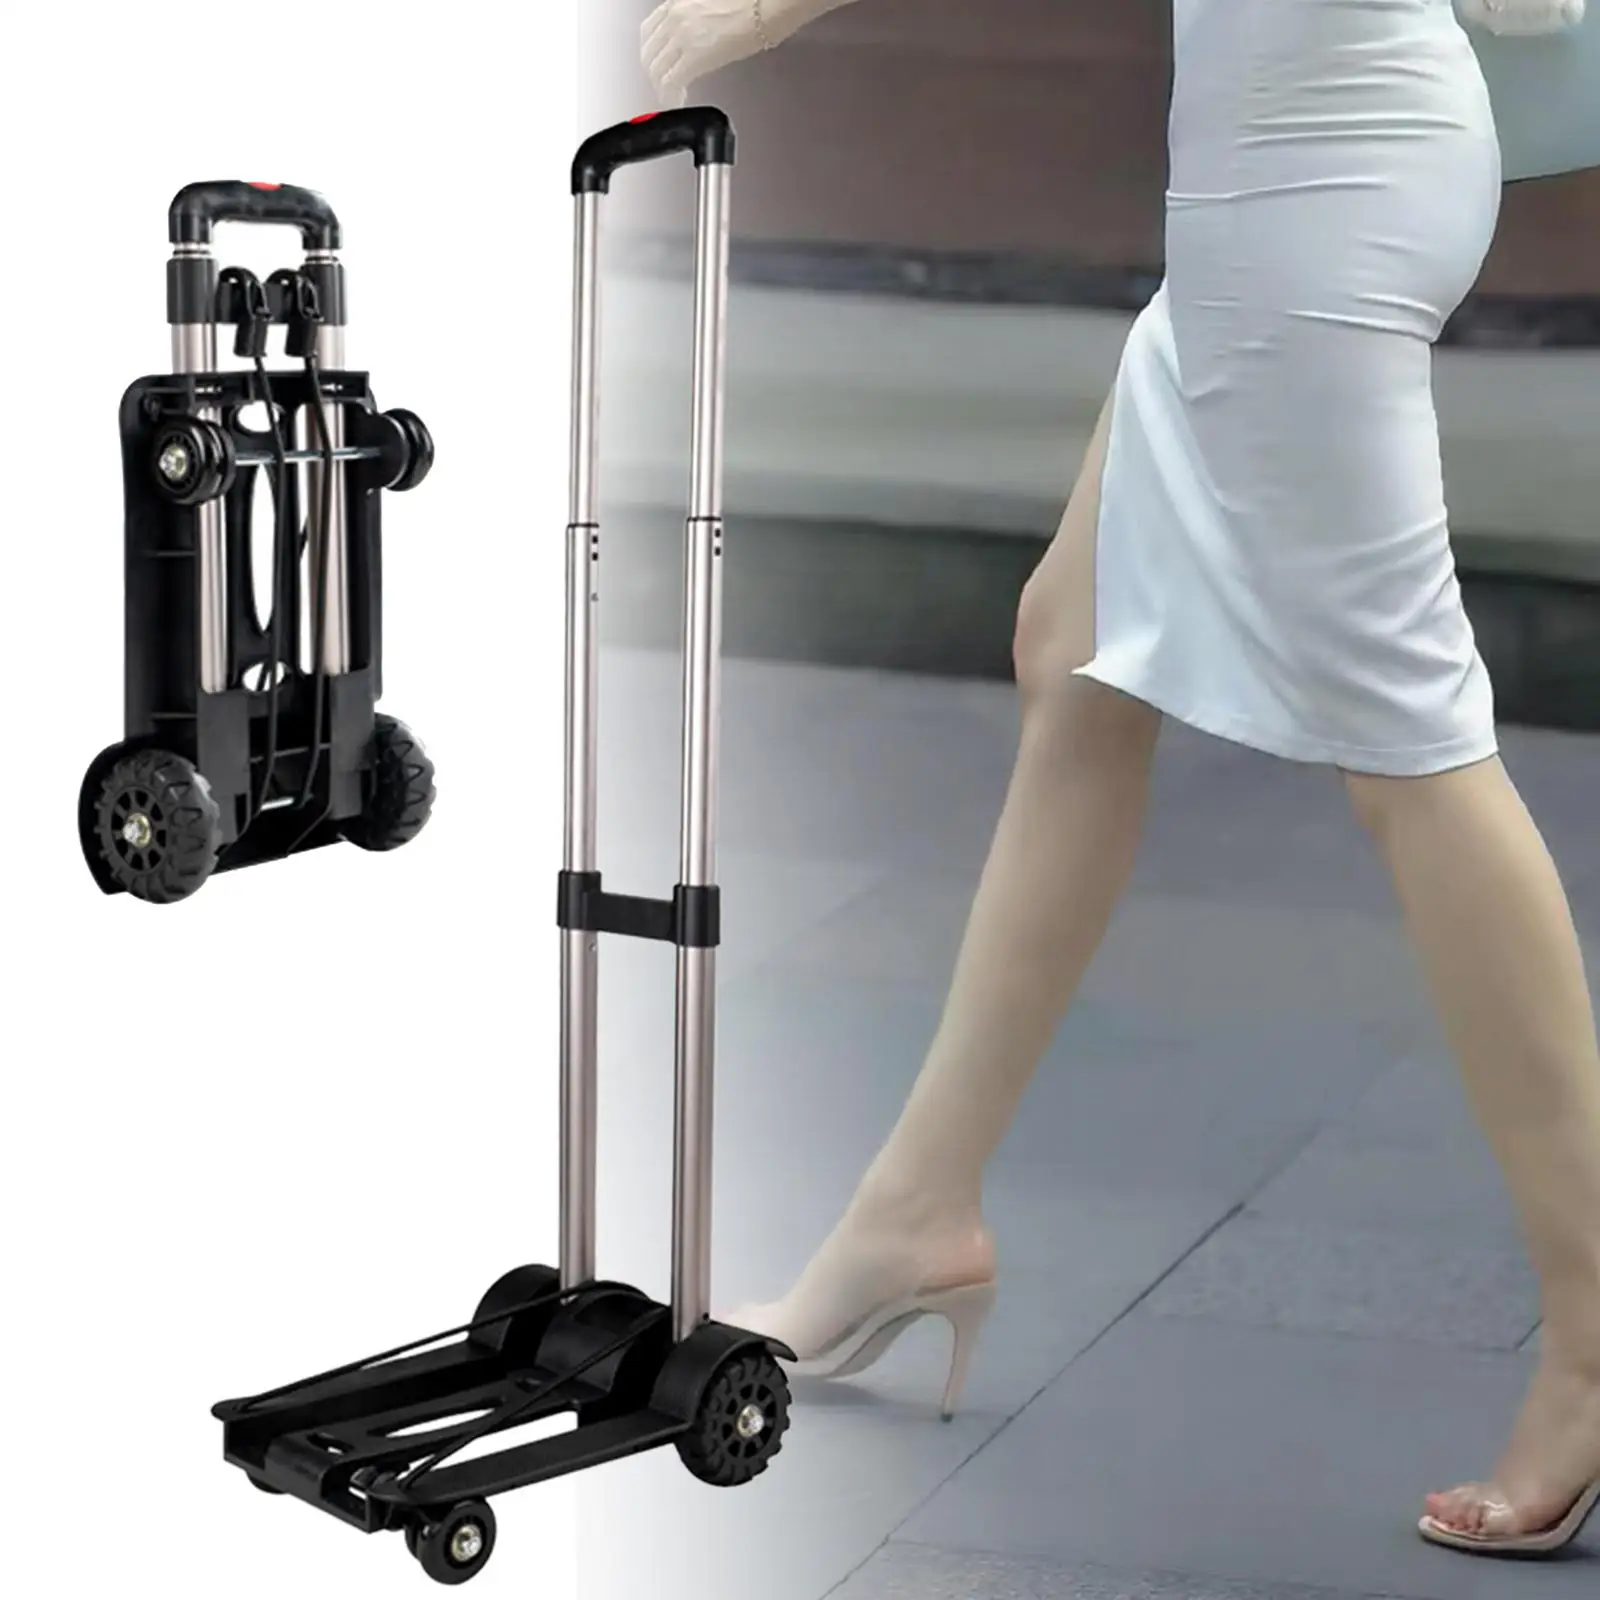 Folding Hand Truck Portable Folding Hand Cart Utility Cart Furniture Wheel Trolley for Warehouse Stair Climbing Travel Household